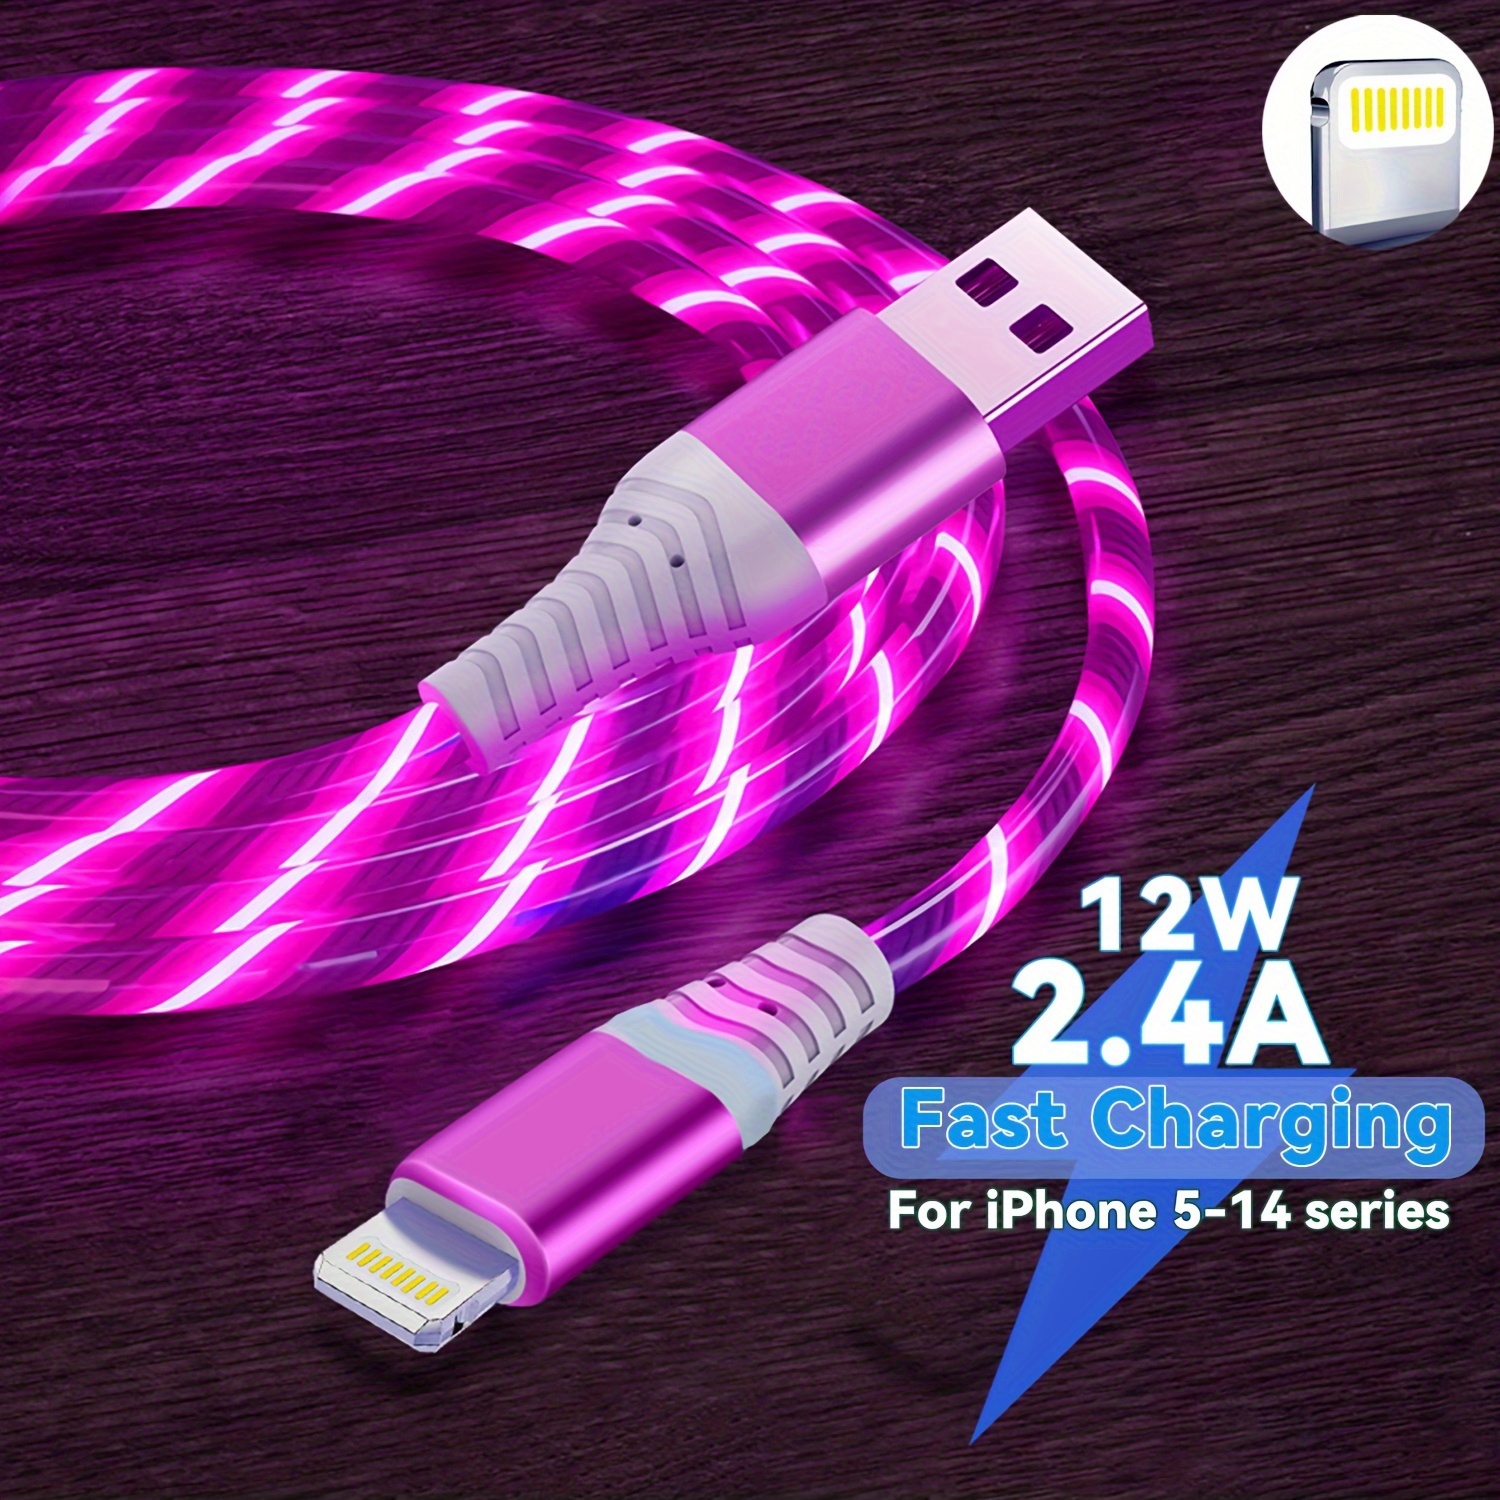 

durable Polyester" Binboom Mfi Certified Usb-a To 12w Fast Charge Cable With Led Indicator, High-speed Data Transfer For Iphone 14/13/12 Series And More - Durable Polyester Fiber